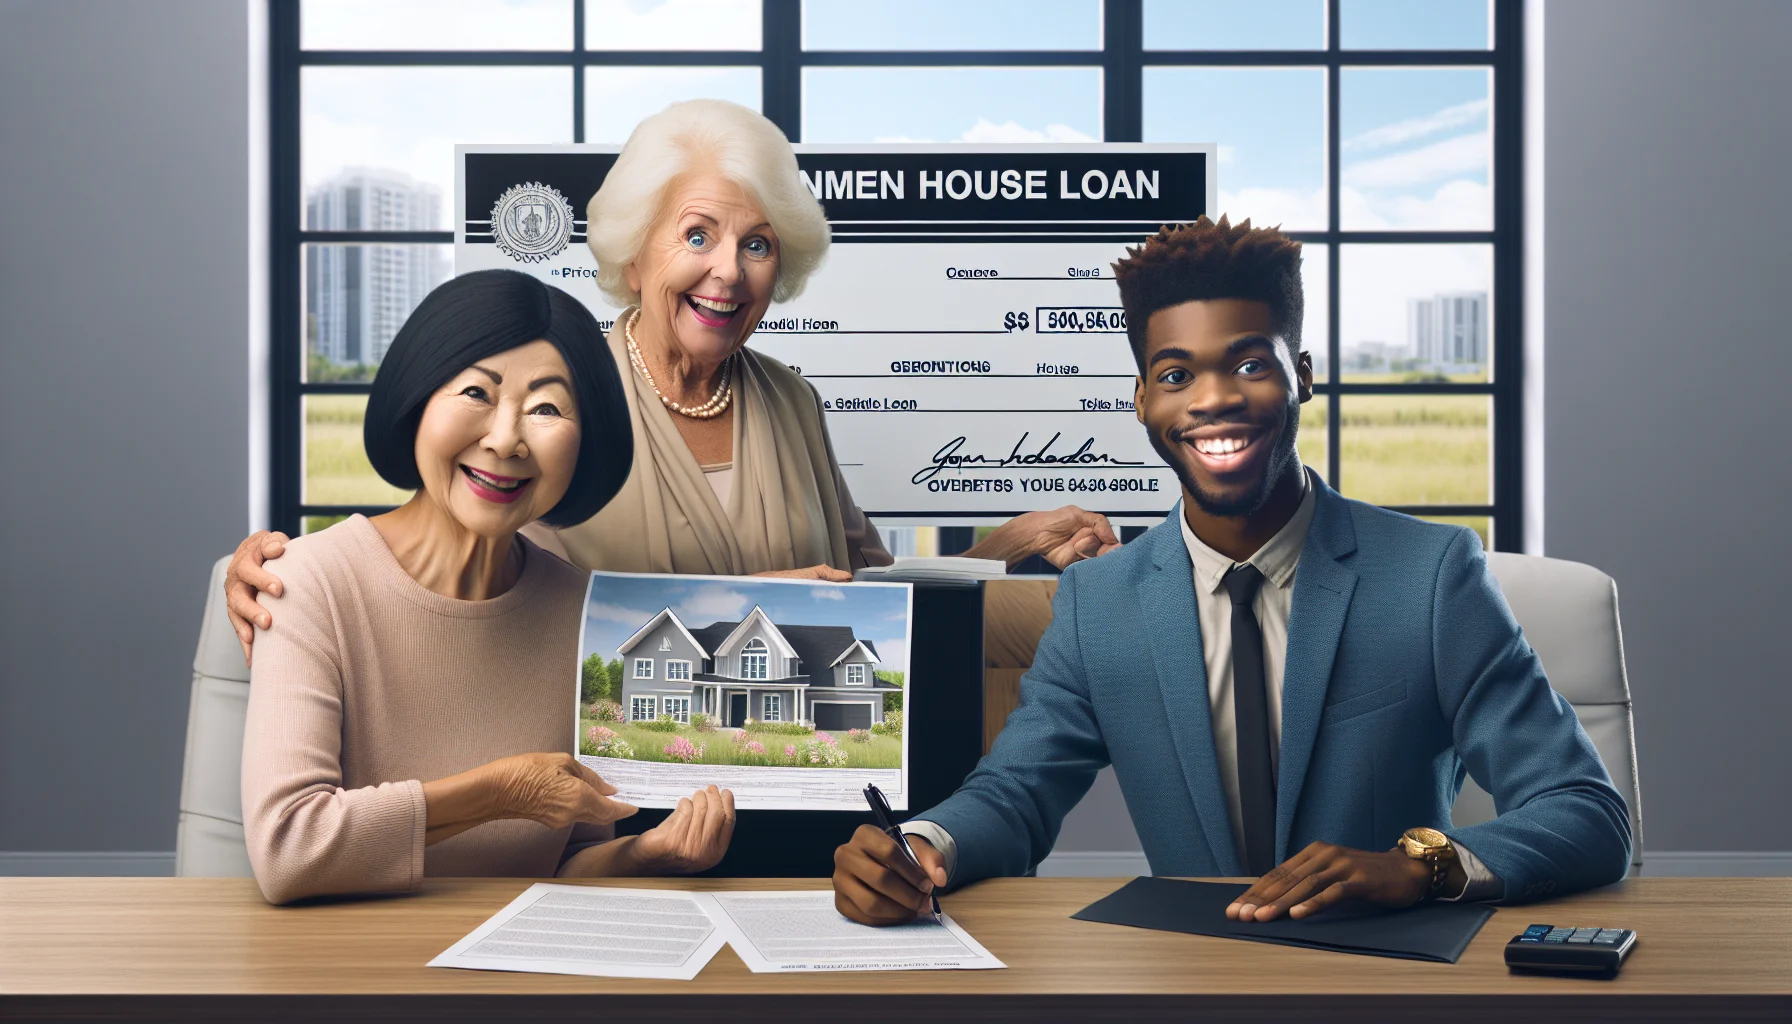 Generate a humorous and realistic image of a perfect scenario involving government house loans. Picture this: A middle-aged Asian woman and a young Black man, both dressed in professional attire, excitedly signing documents in a brightly lit room. On the table, you can see the blueprints of an idyllic suburban home. Across the table, a happily smiling, elderly Caucasian woman, is handing over a large symbolic cheque labeled 'Government House Loan'. In the background, a billboard illustrates a spectrum of houses with price tags significantly lower than market rates.